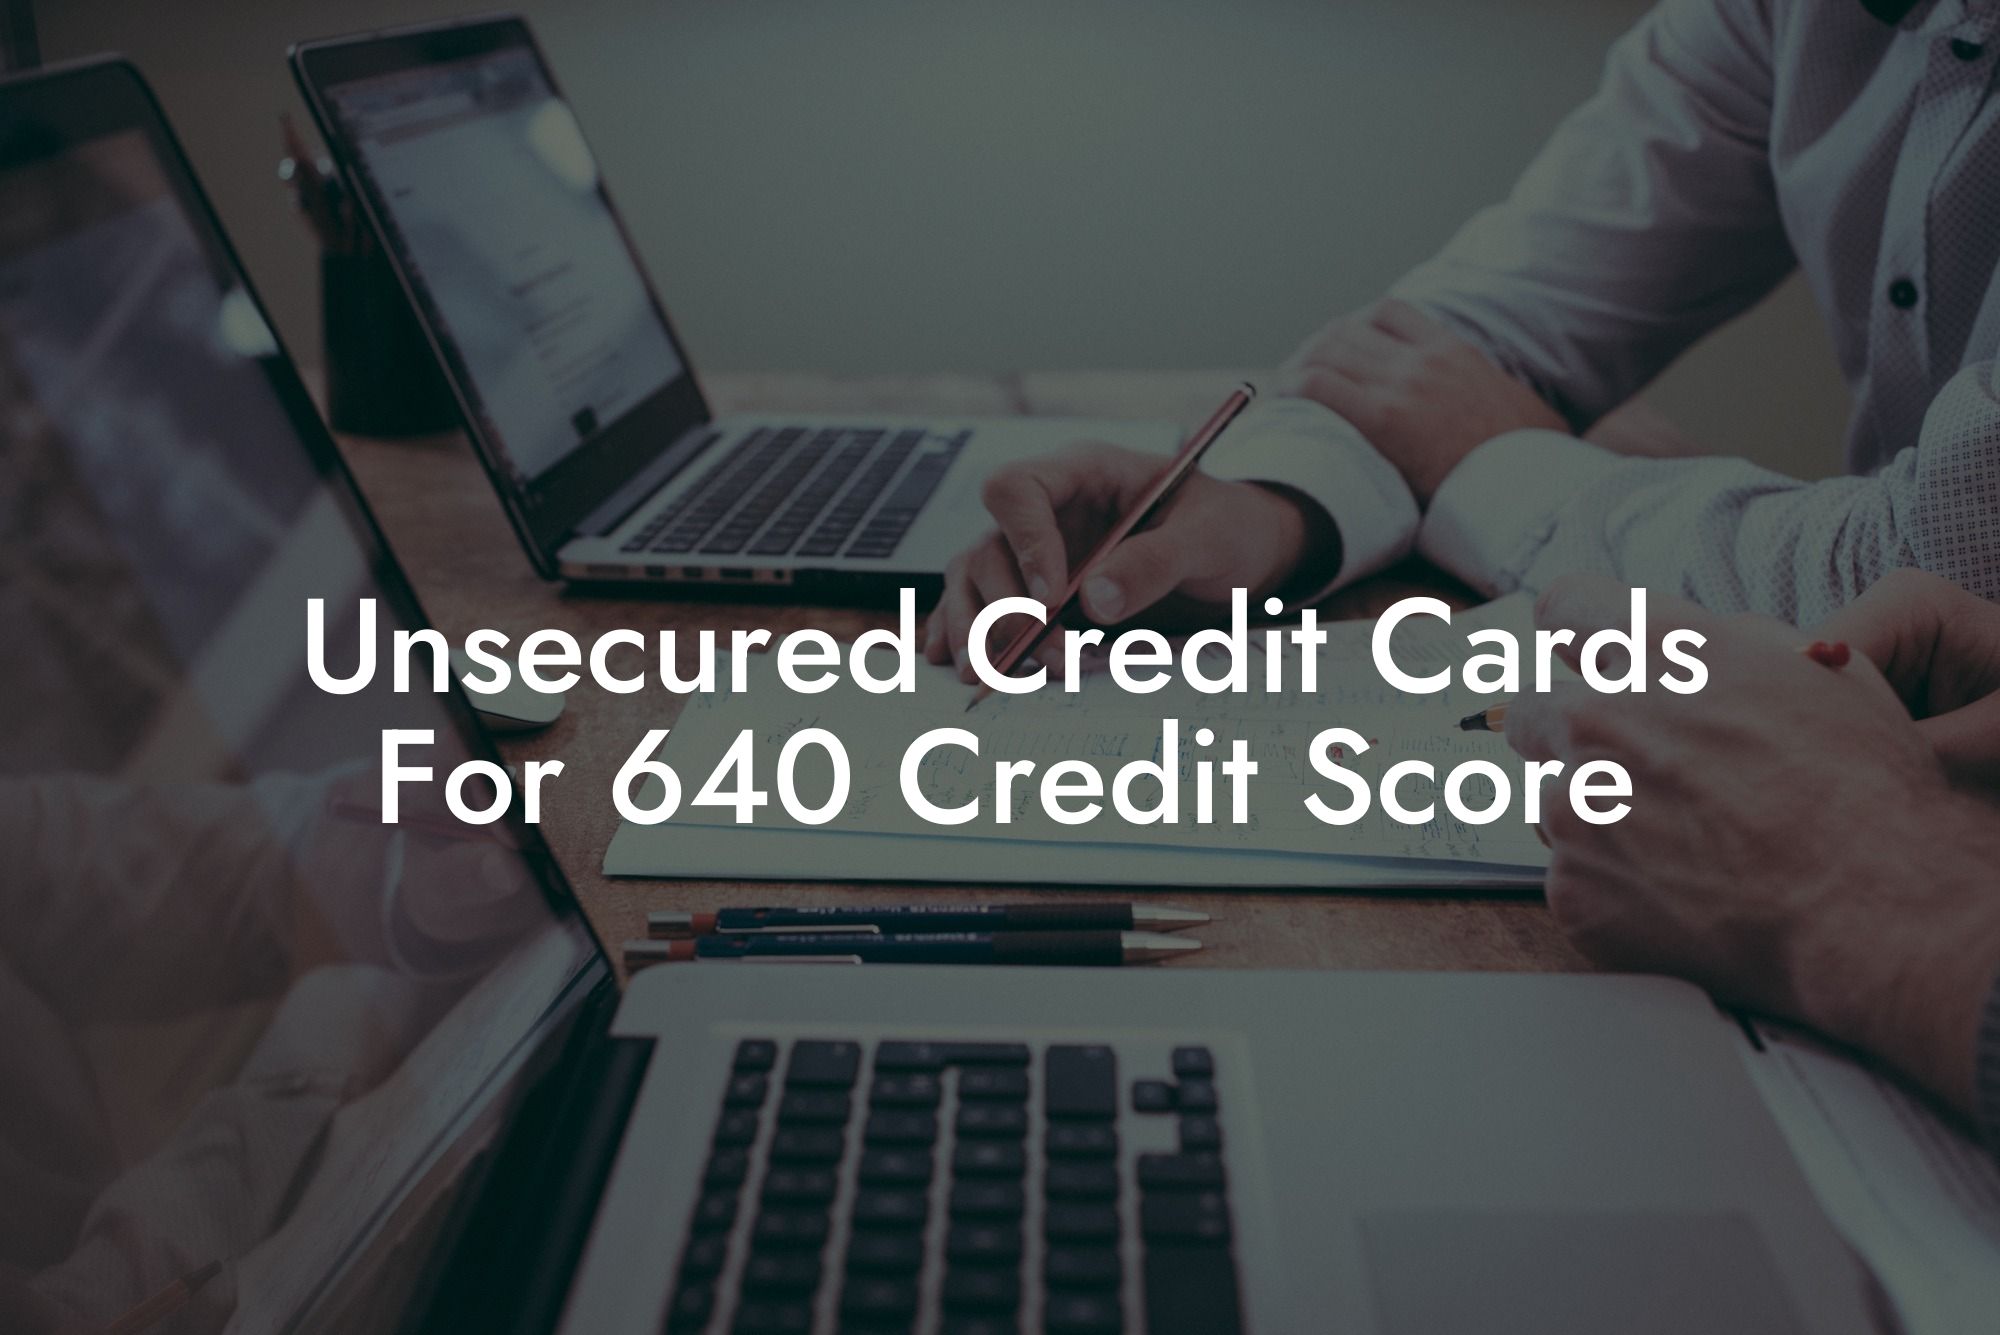 Unsecured Credit Cards For 640 Credit Score